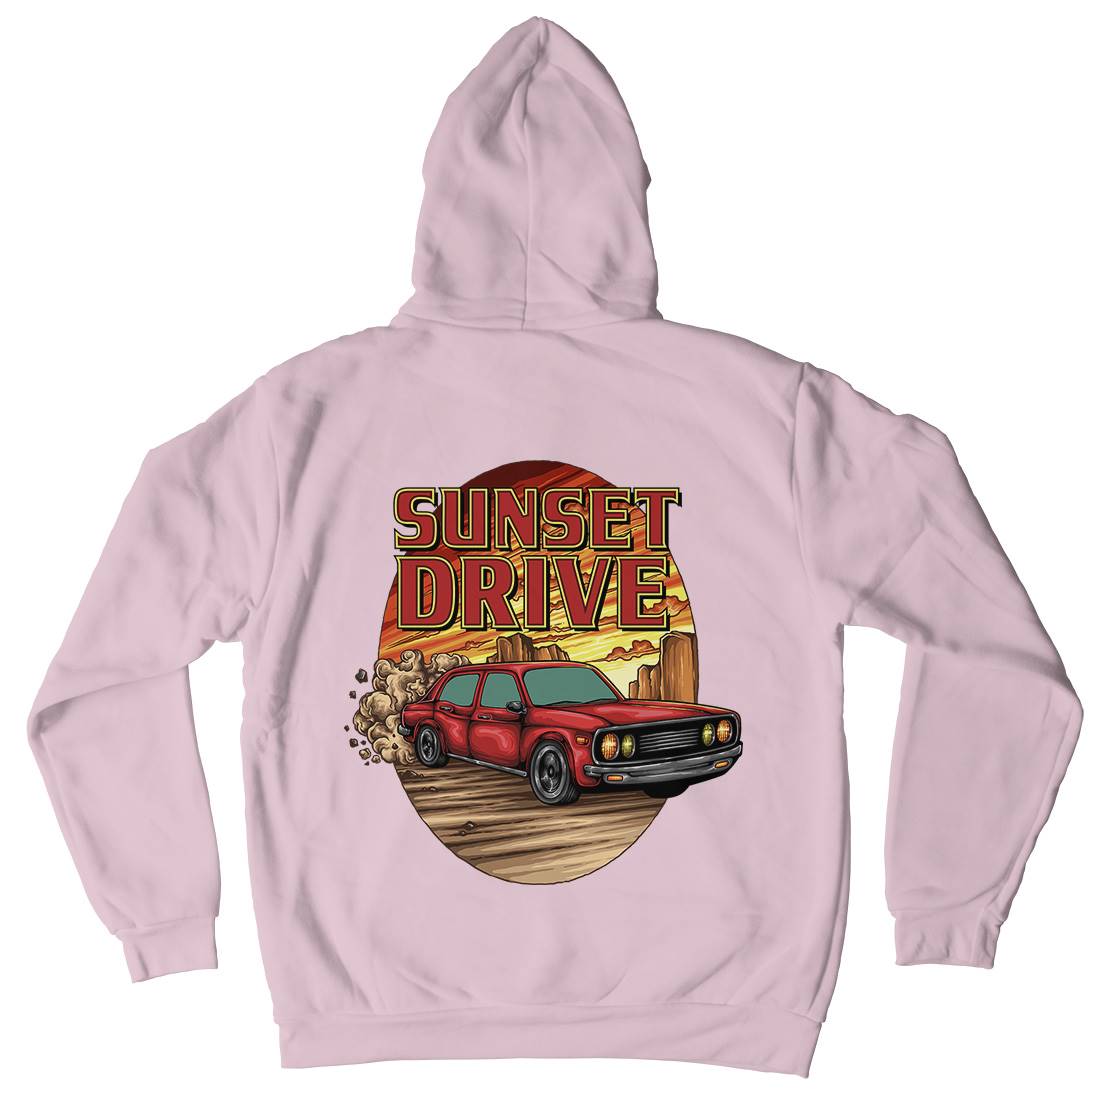 Sunset Drive Kids Crew Neck Hoodie Cars A472